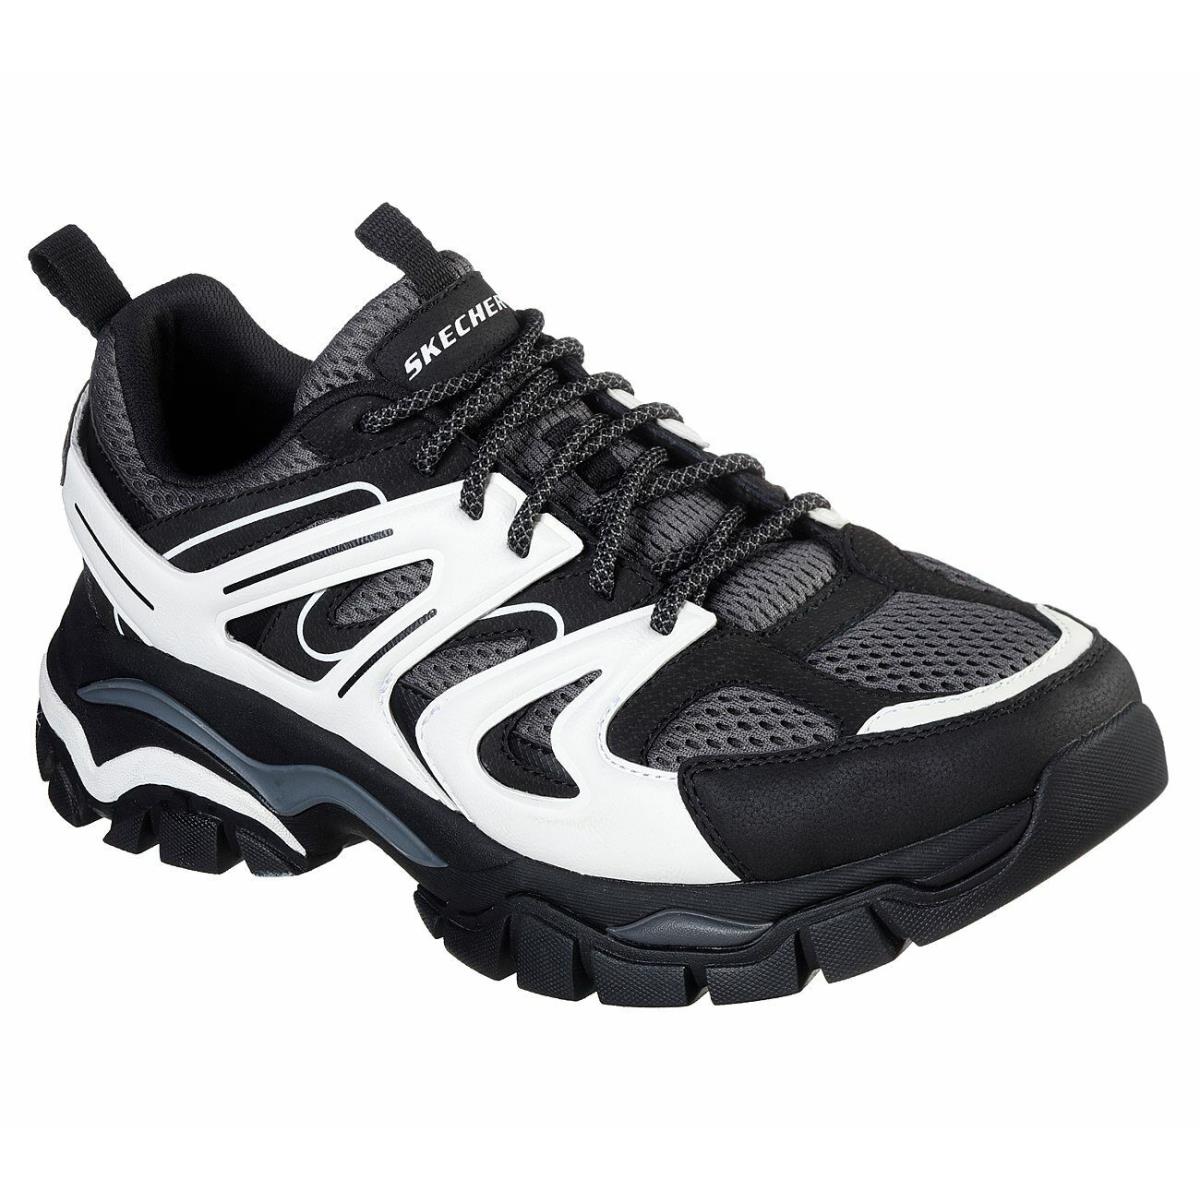 Men`s Skechers RX Fit Stak Ultra Treso Casual Shoes 66255 /bkw Multi Sizes Bwh - Black/White